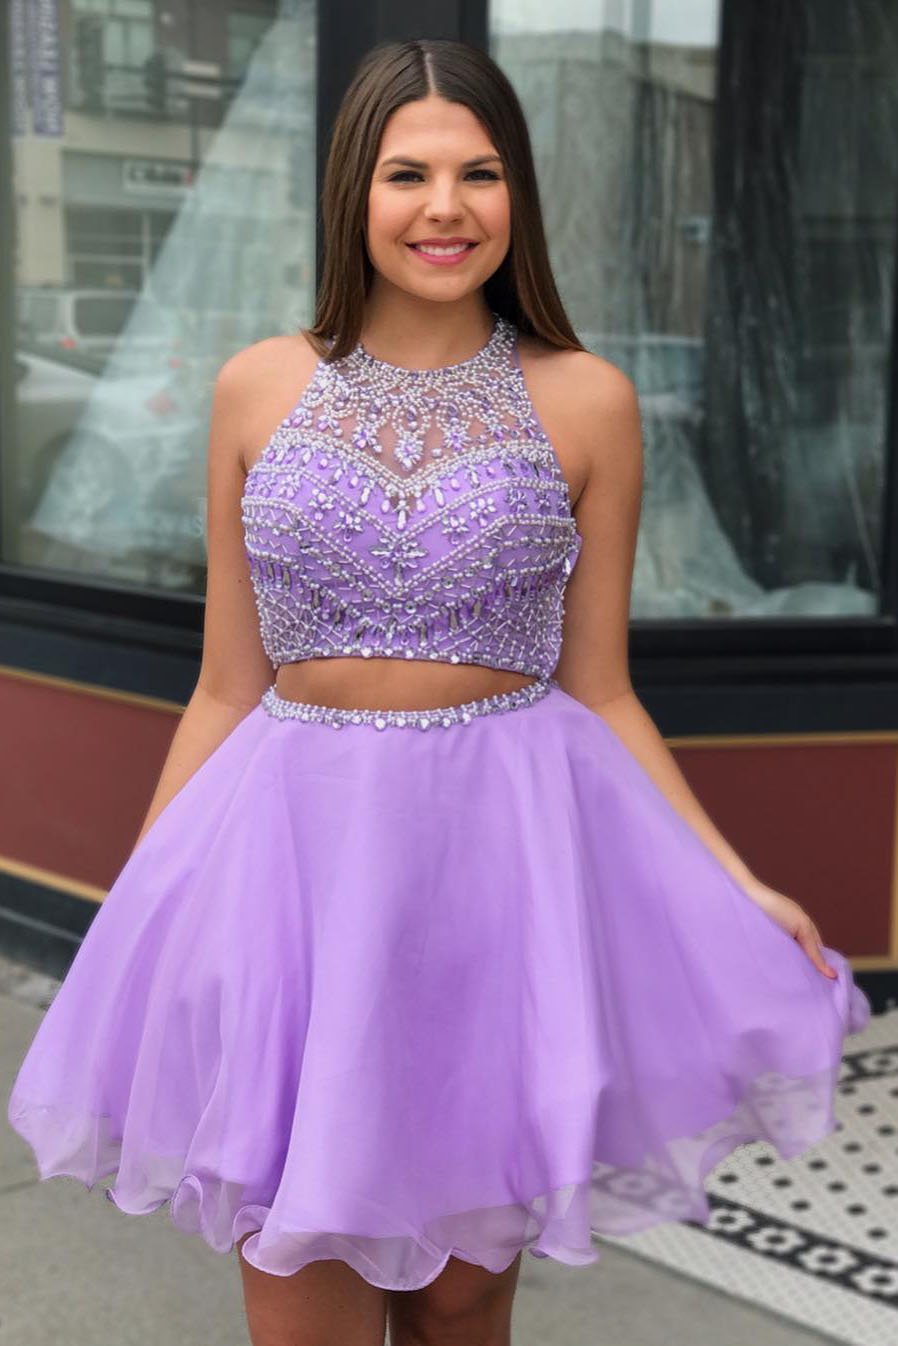 Two Pieces Purple Homecoming Dress, Short Prom Dress ,Dresses For Graduation Party, Evening Dress, Formal Dress, DTH017